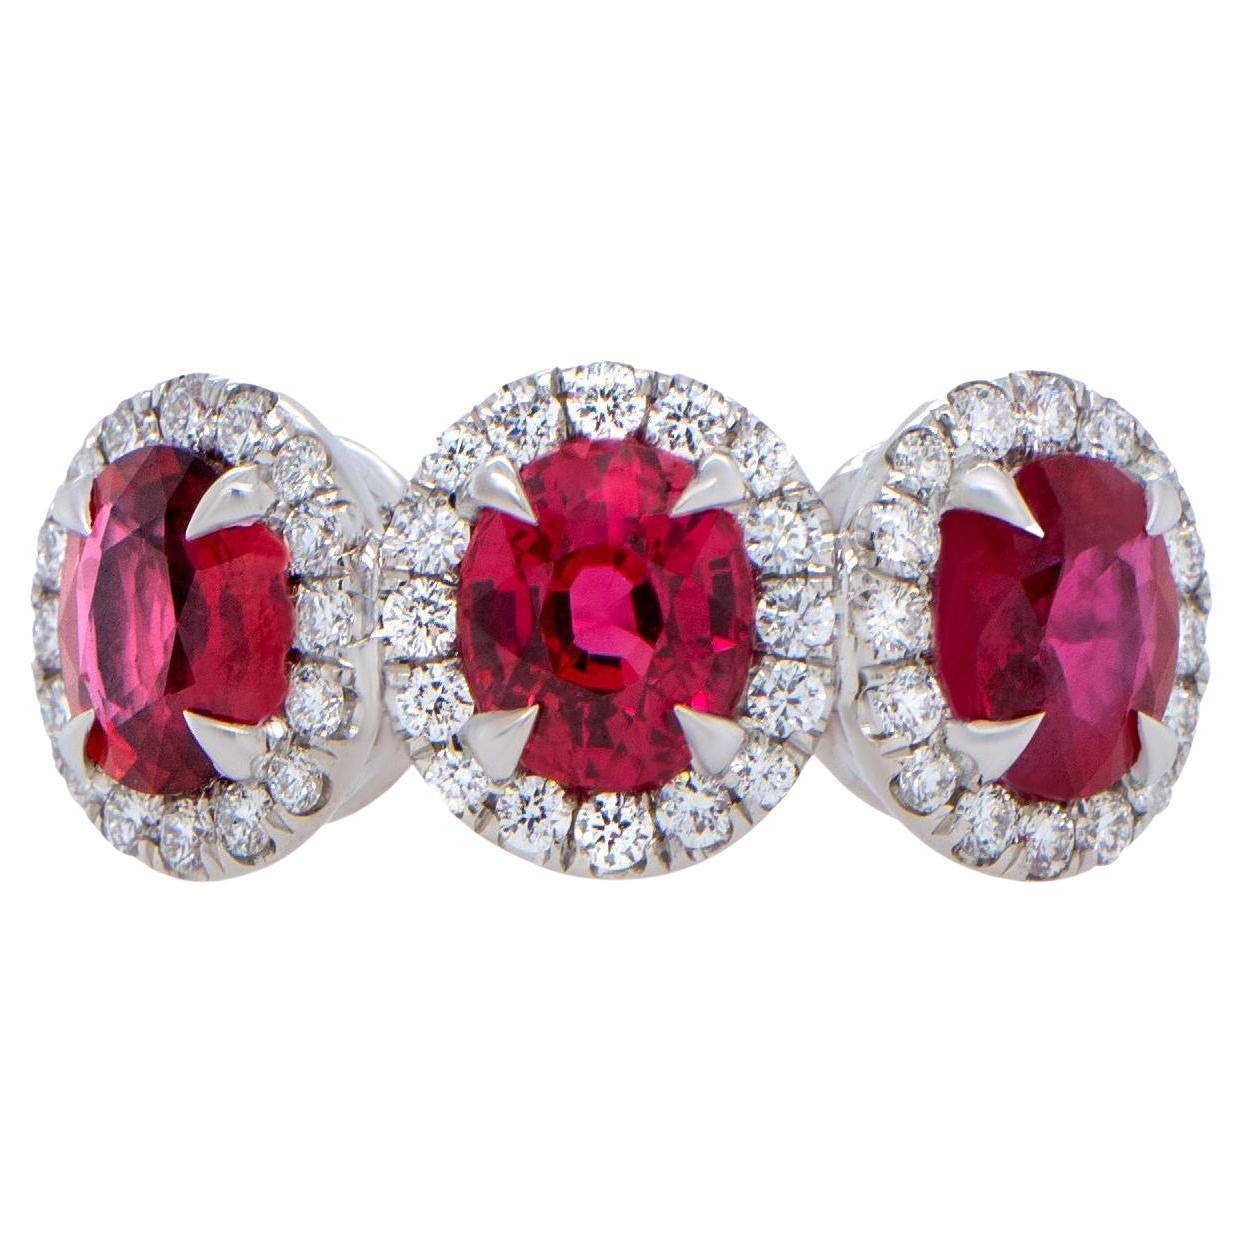 Three Rubies Ring Diamond Setting 3.21 Carats 18K White Gold For Sale